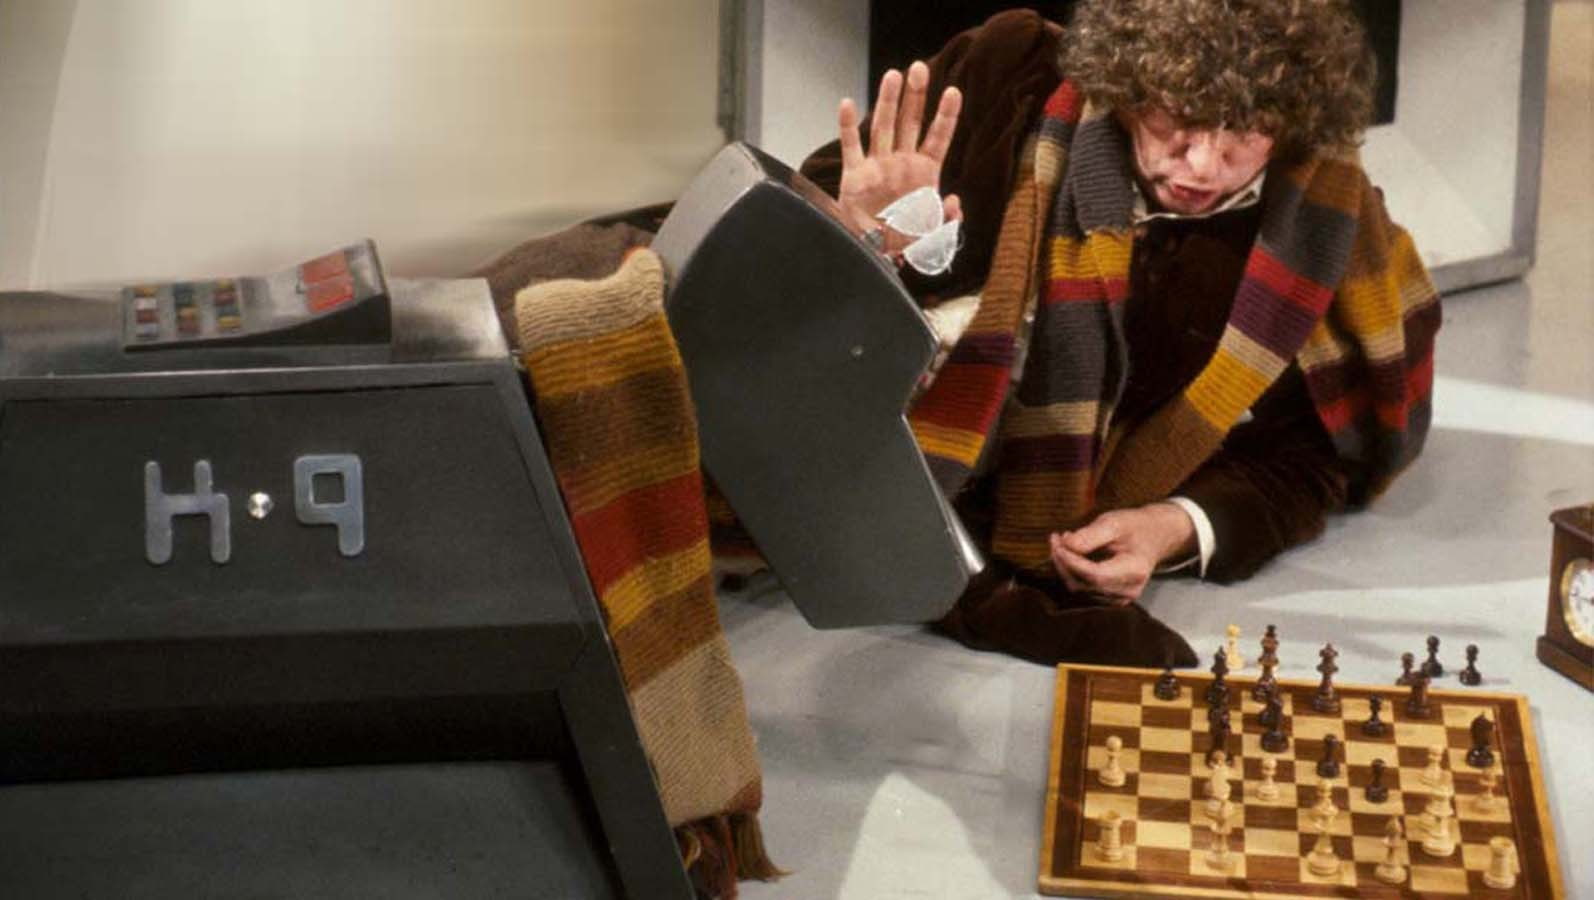 doctor who tom baker k 9, one person, indoors, leisure games